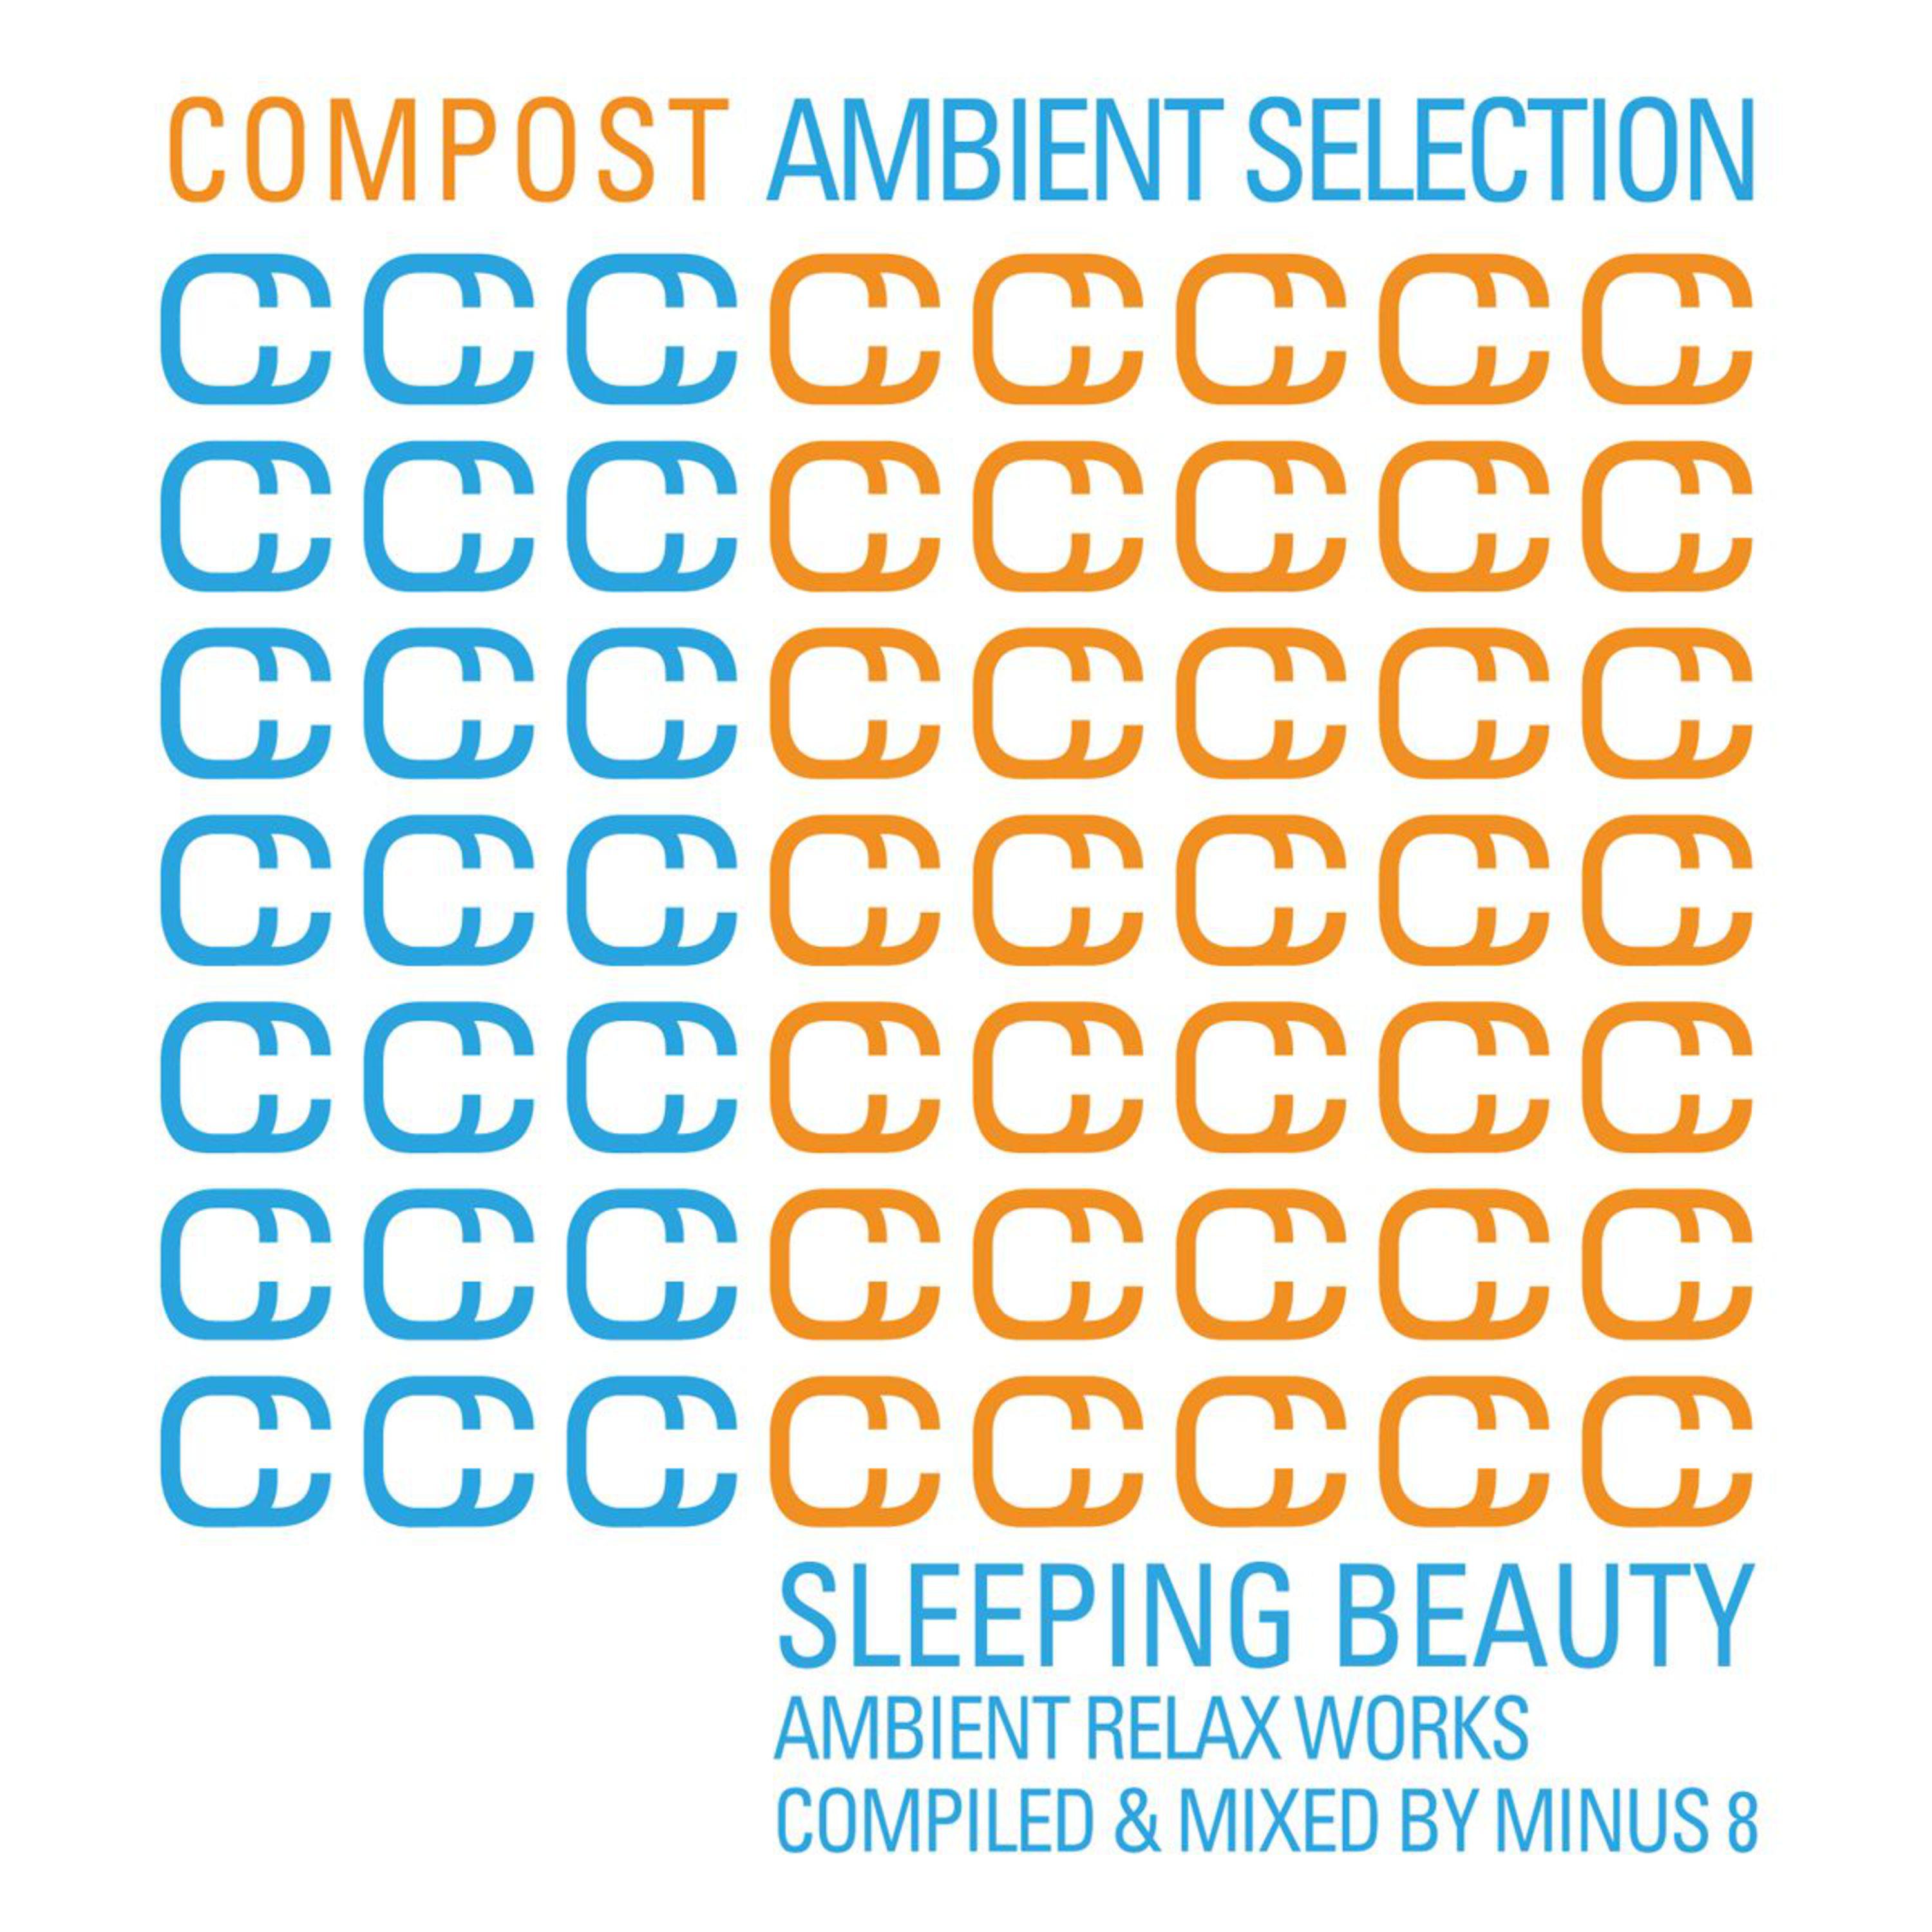 Compost Ambient Selection - Sleeping Beauty - compiled and mixed by Minus 8